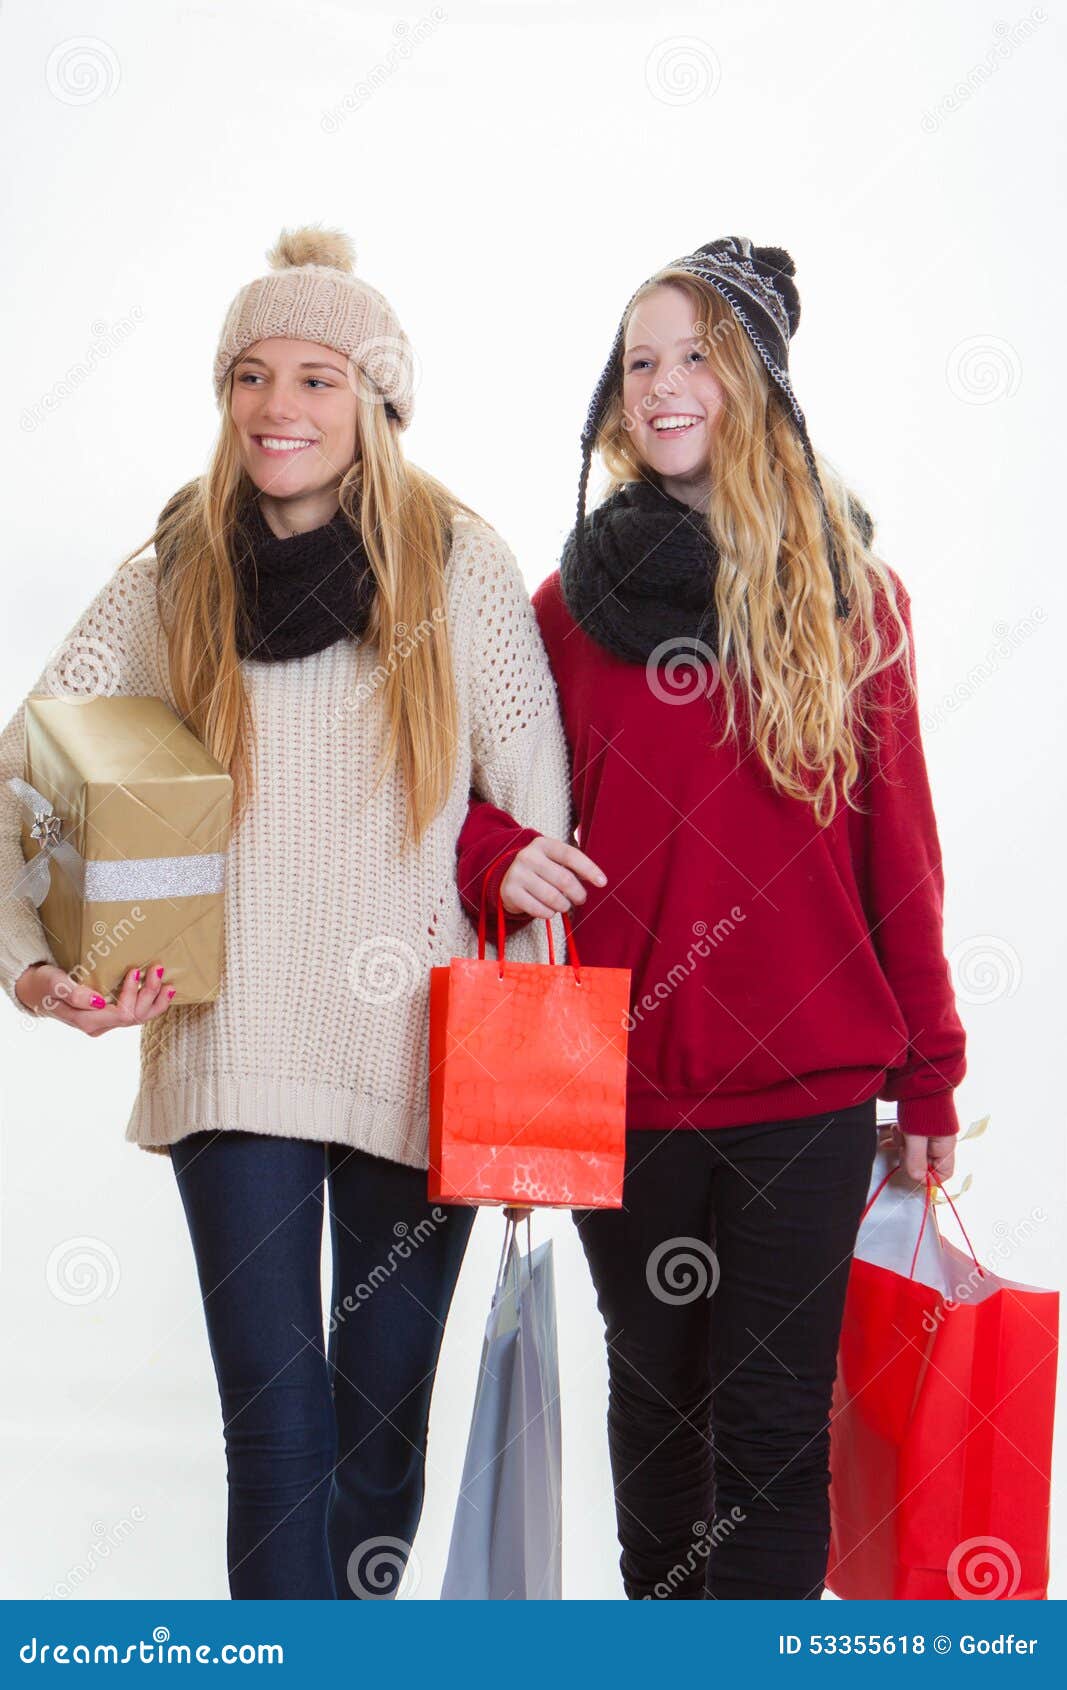 Teen Girls Shopping for Gifts Stock Photo - Image of purchases, gifts ...